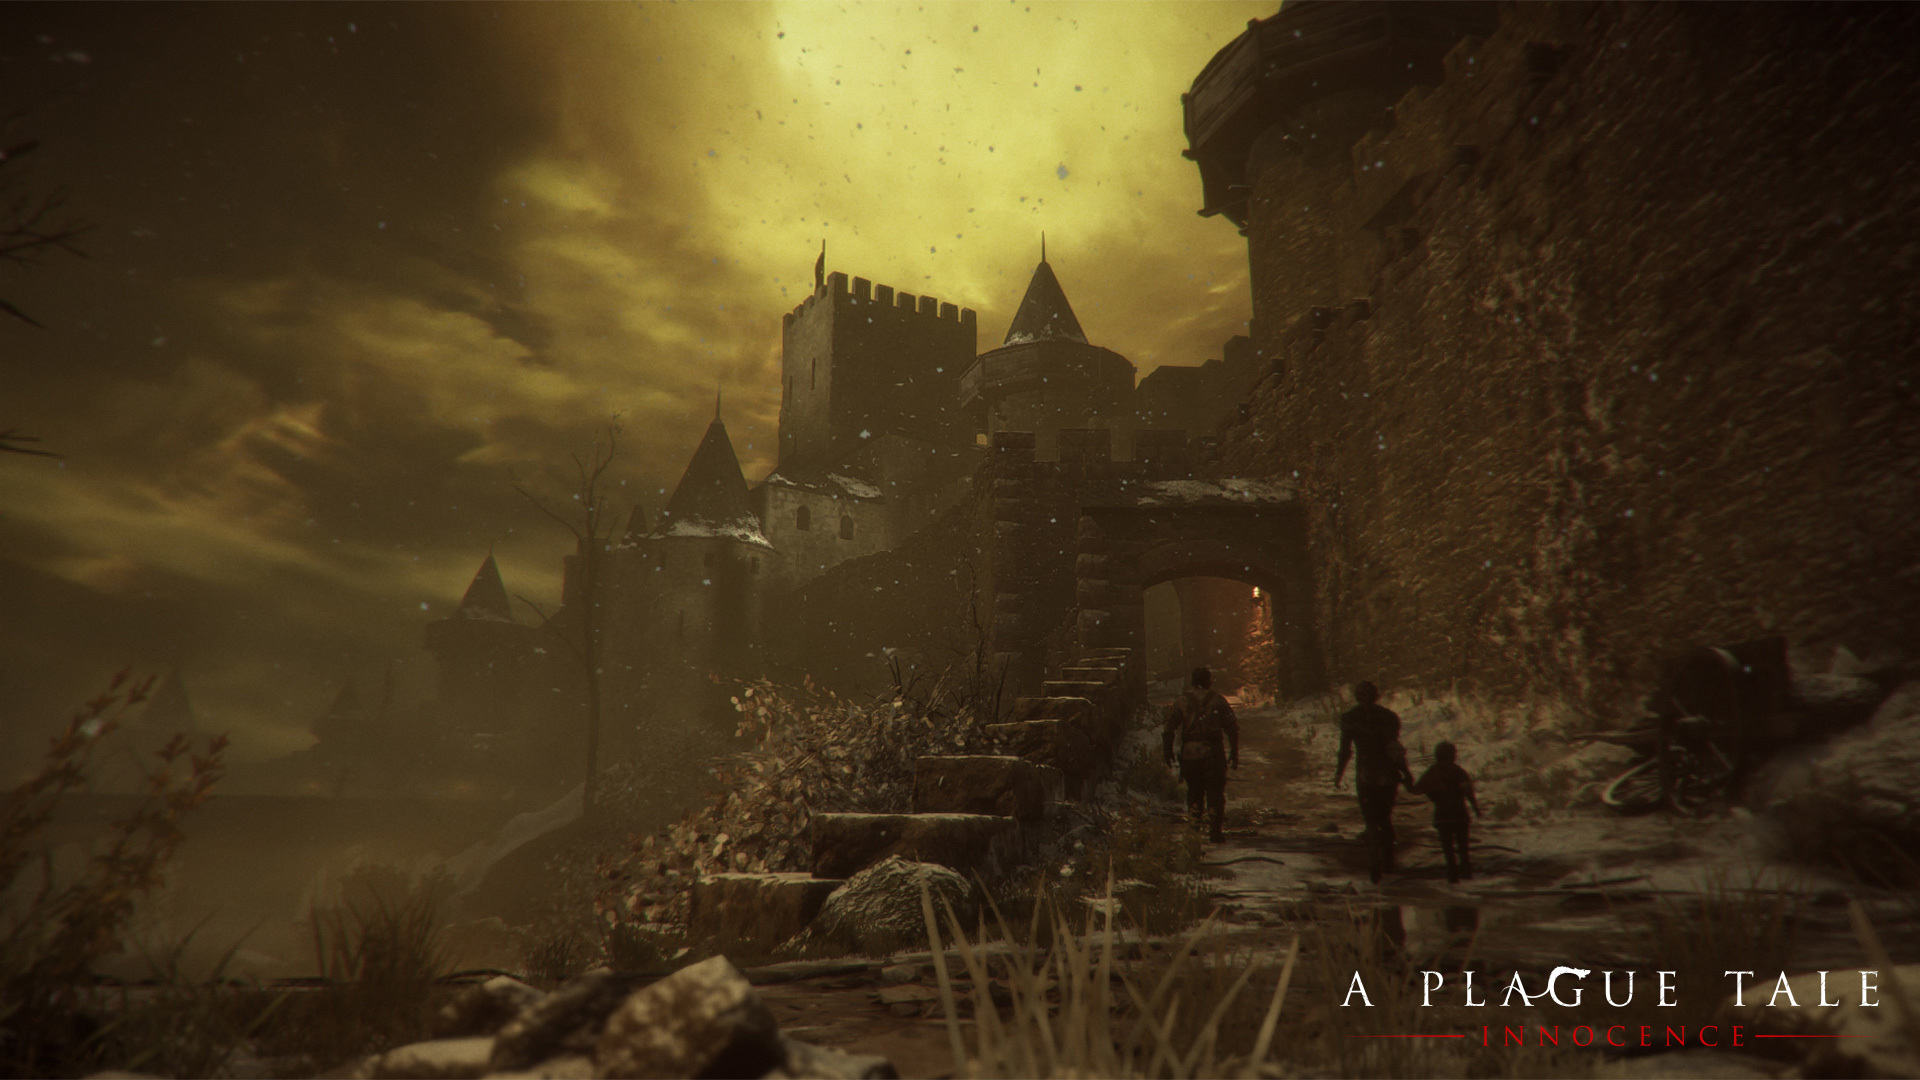 A Plague Tale Innocence Trailer Sets the Stage for Amicia and Hugo's  Adventure